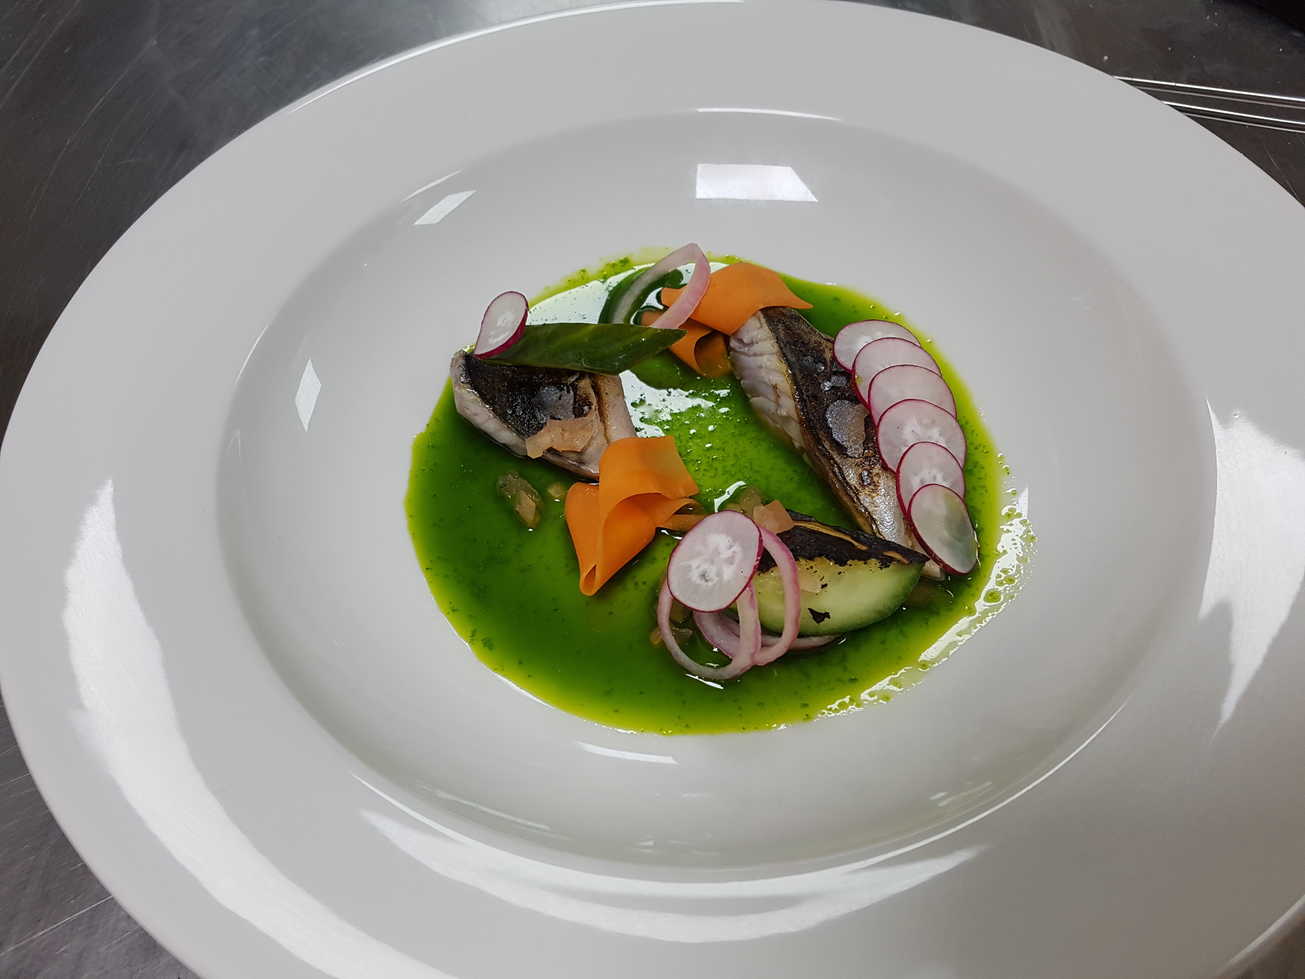 Aaron's Cured Mackerel with Pickled Vegetables and Herb Oil